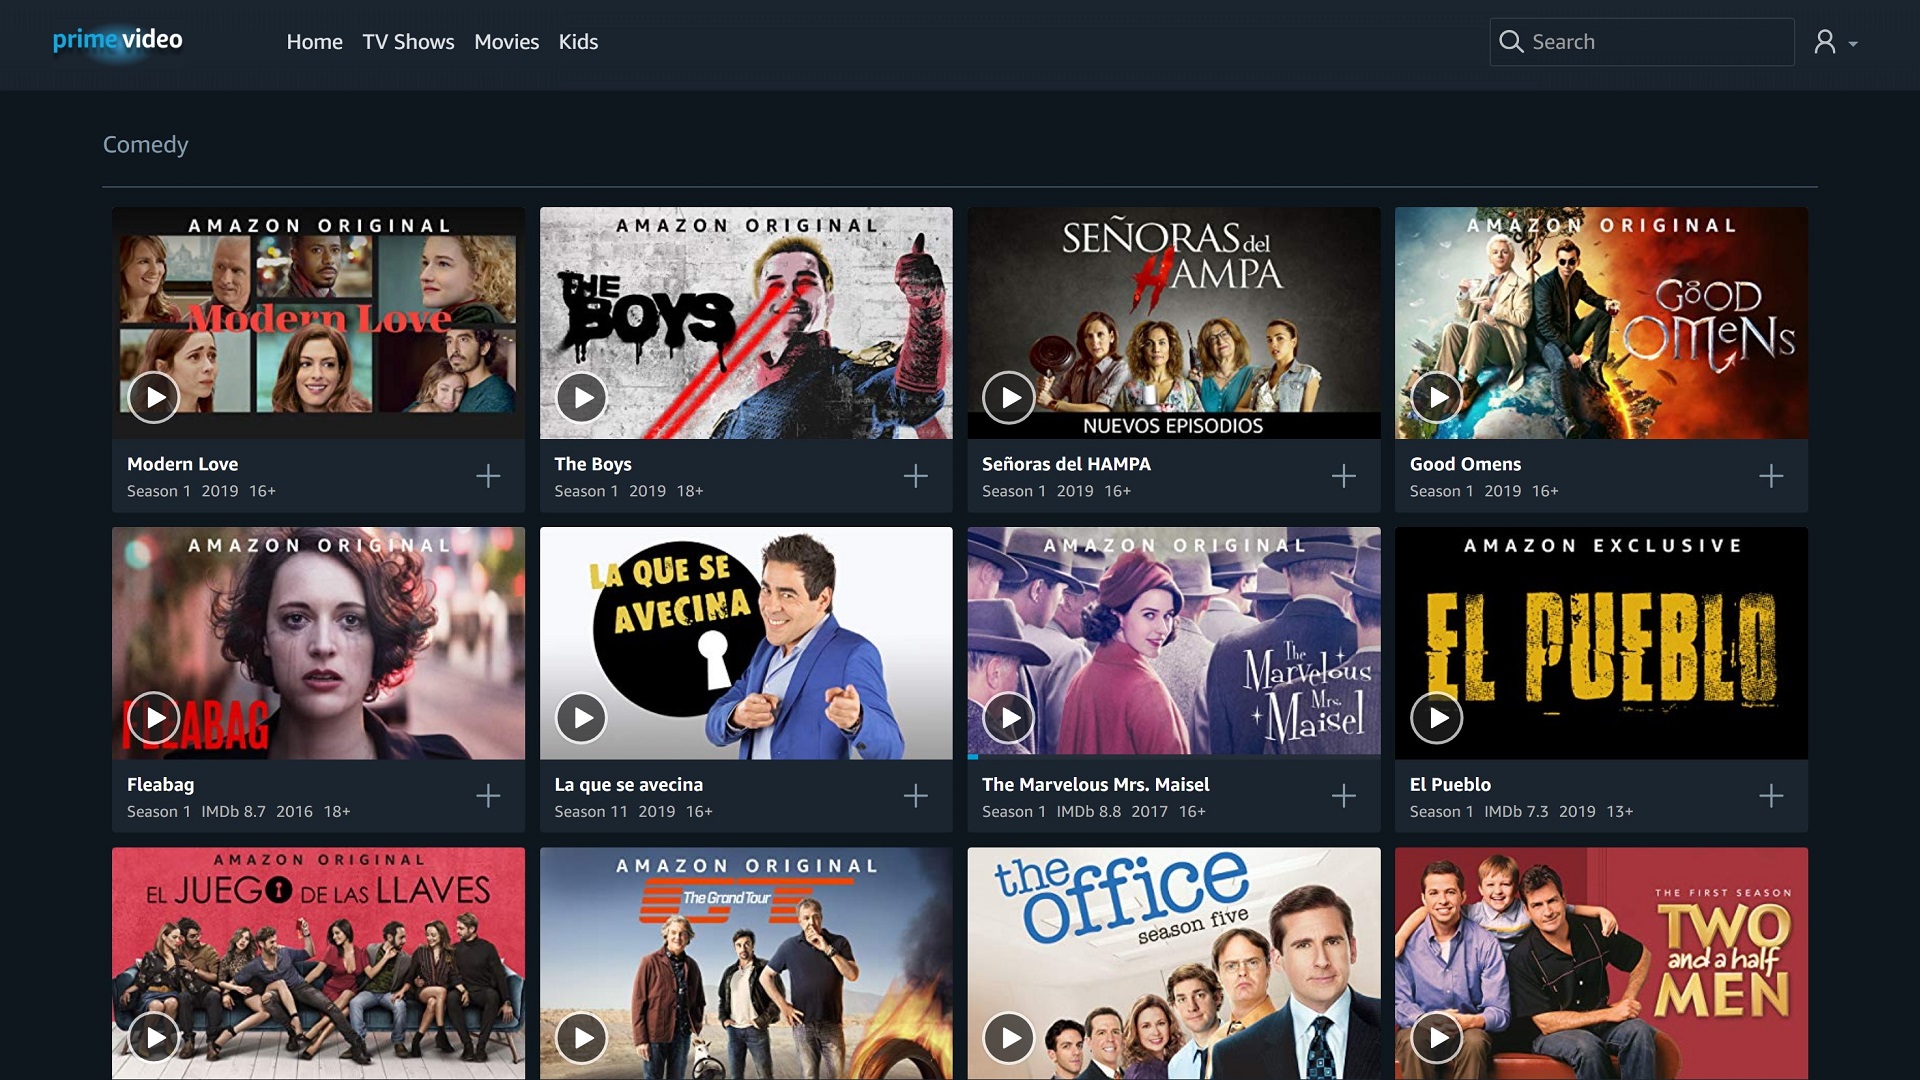 Best Comedies On Amazon Prime Video You Can Watch Right Now